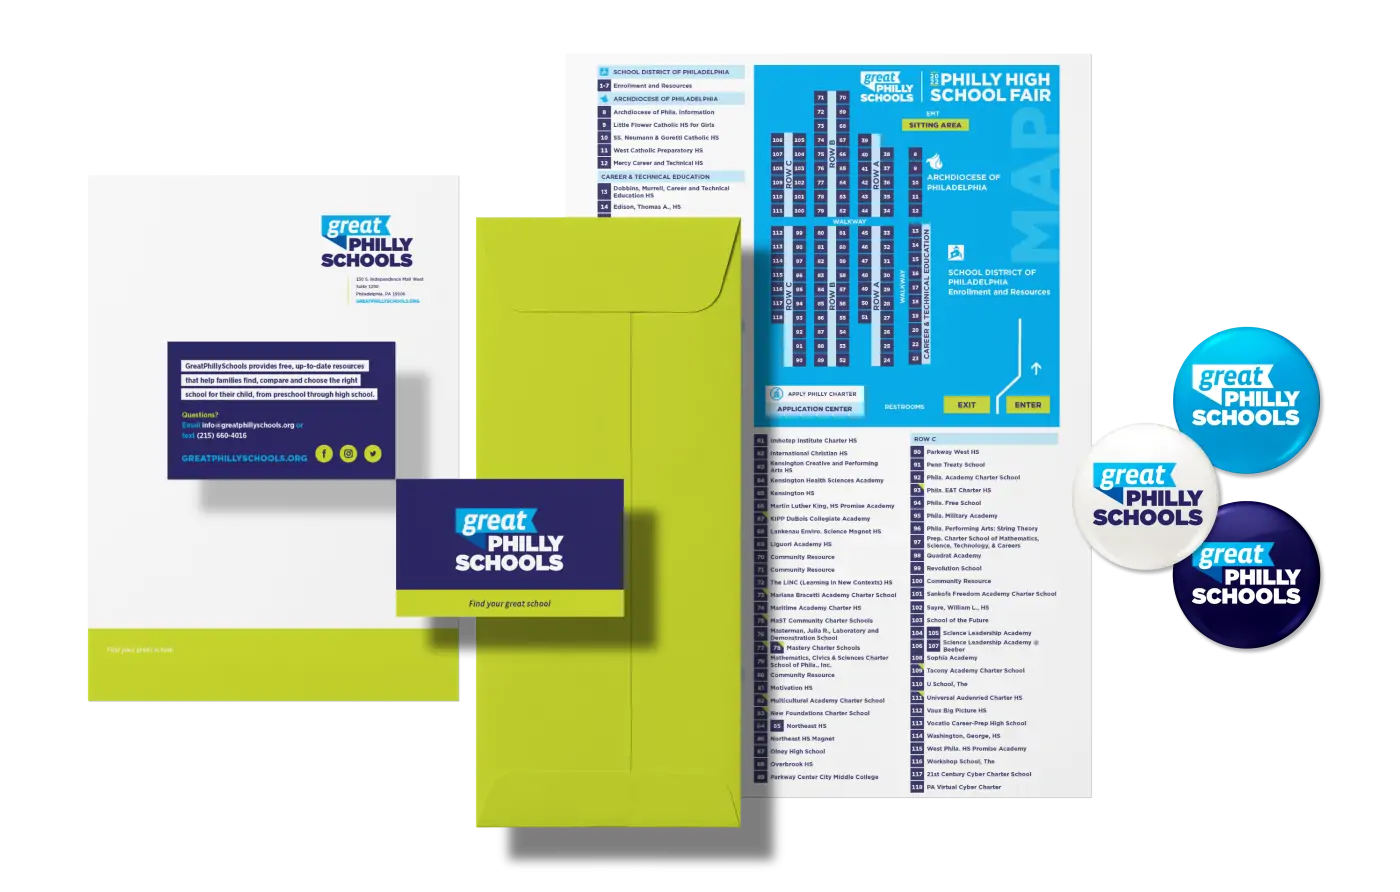 A collection of business collateral featuring business cards, stationery, informational flyers, and buttons with the new branding for GreatPhillySchools